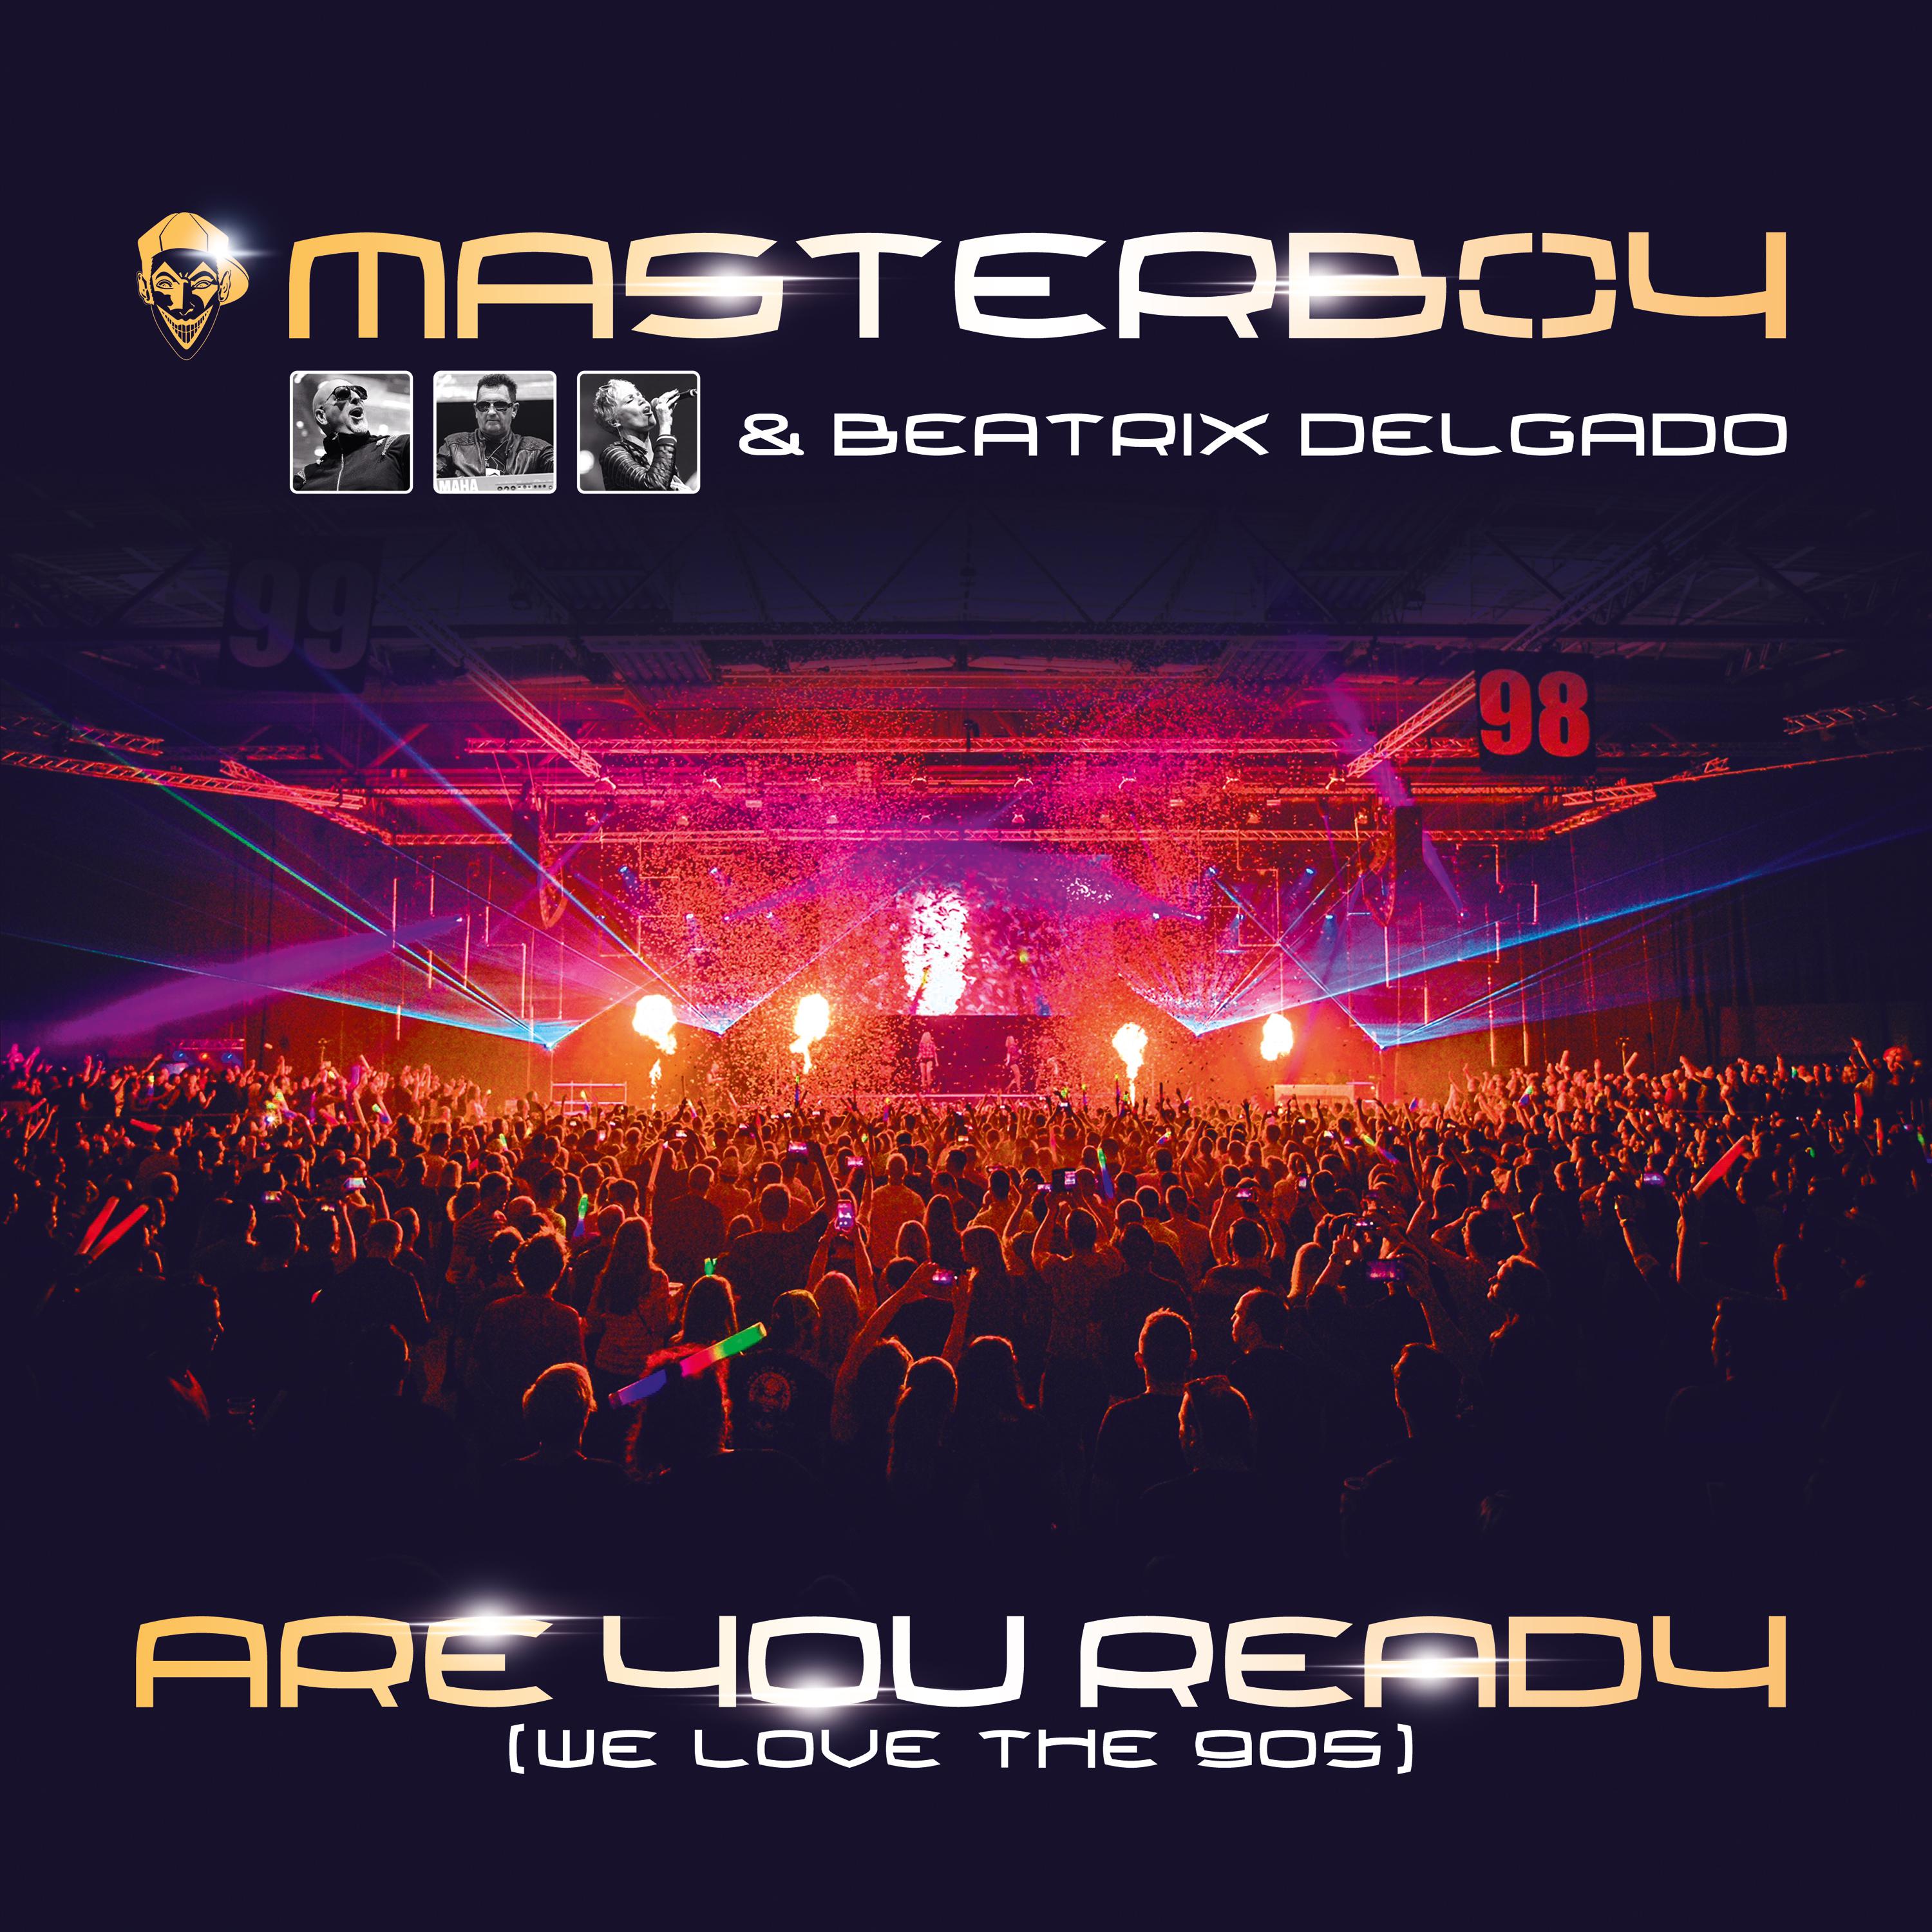 Are You Ready (We Love the 90s) (Empyre One & Enerdizer Remix)